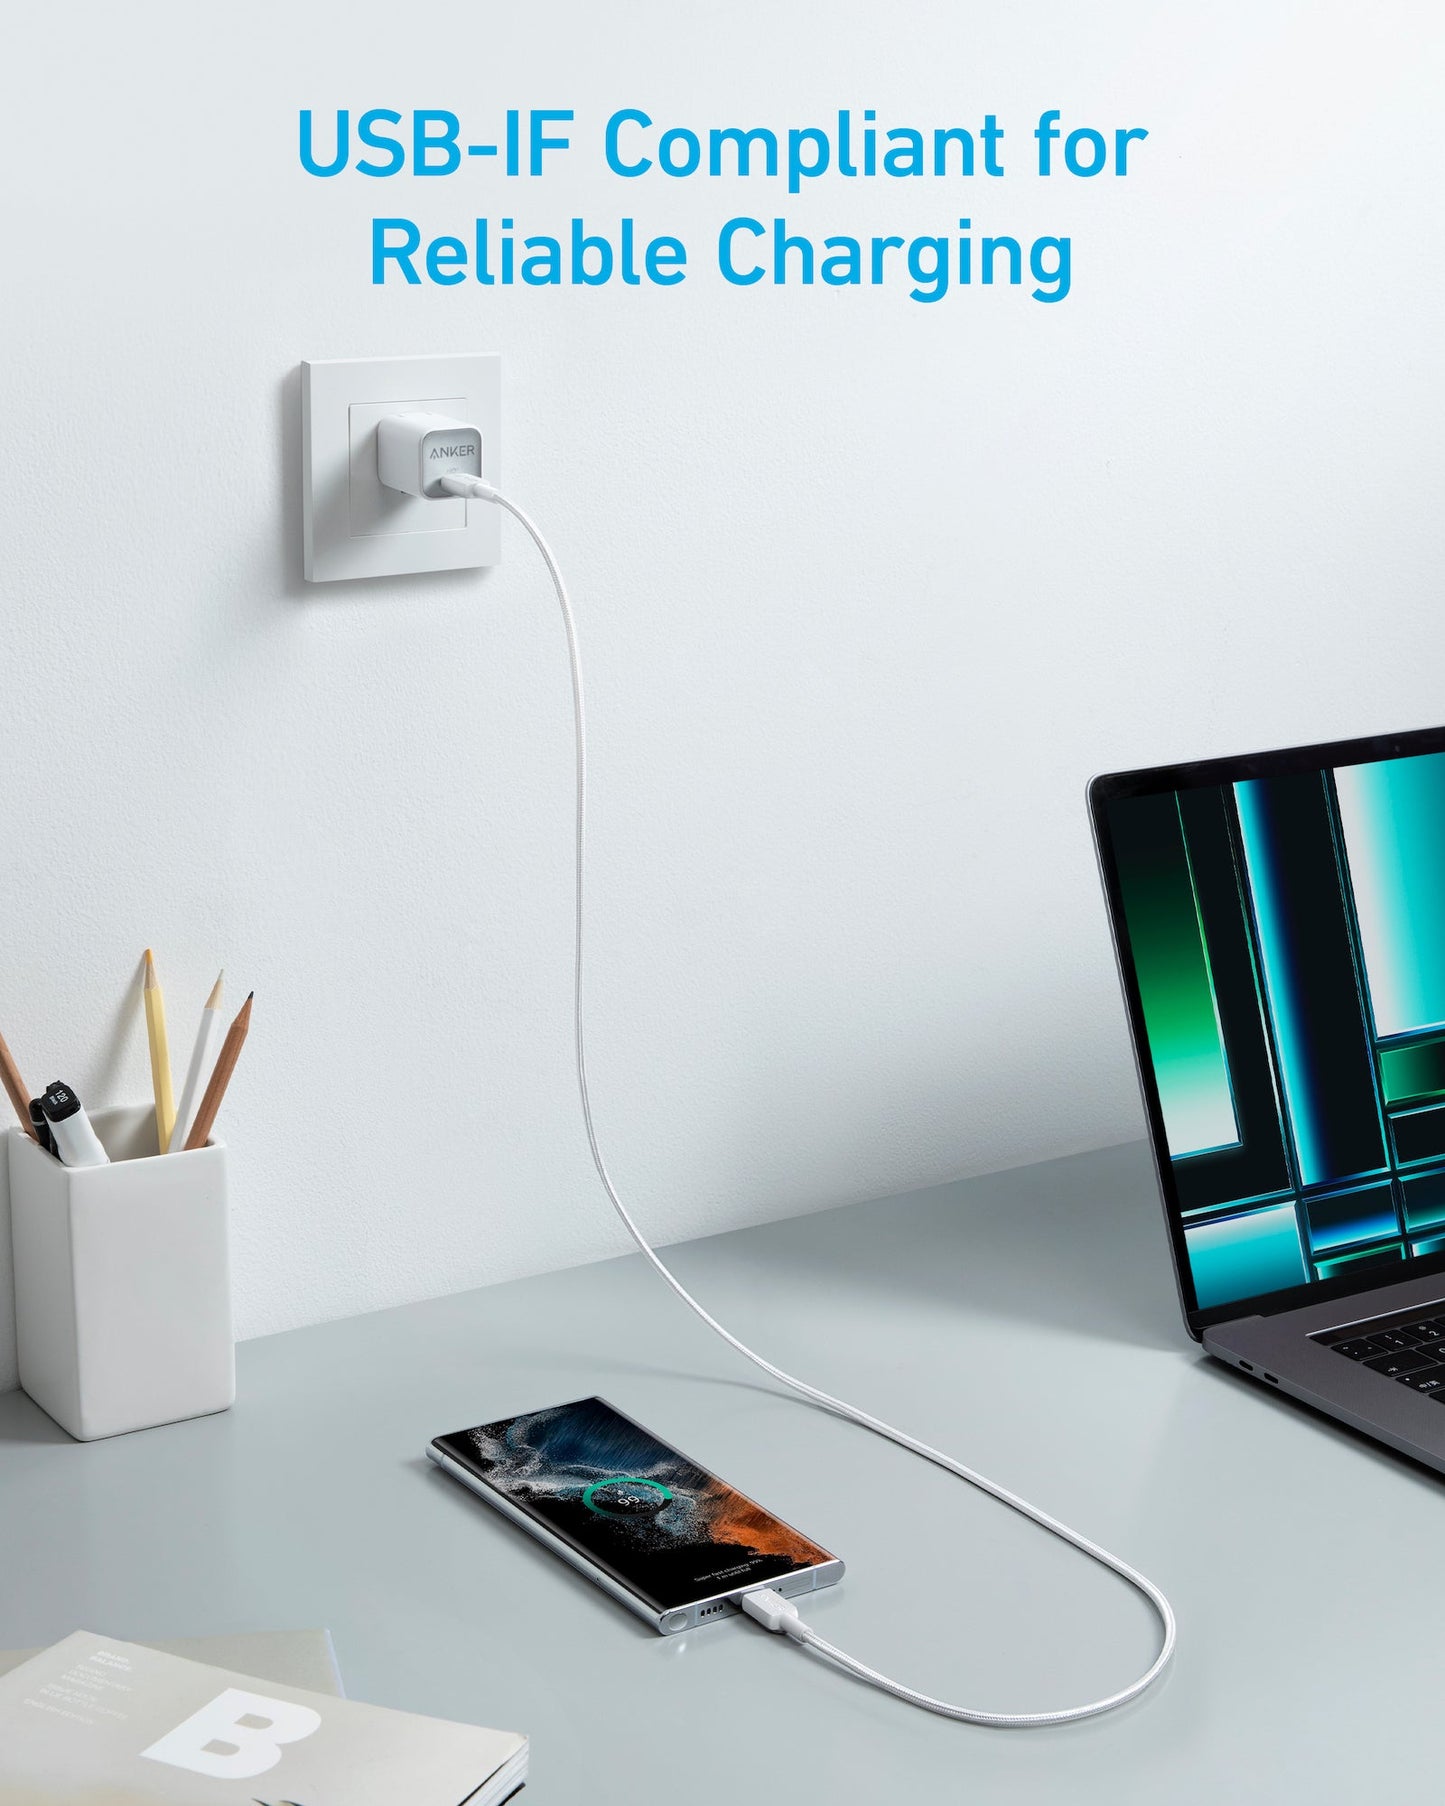 Anker 322 USB-C to USB-C 60W Cable